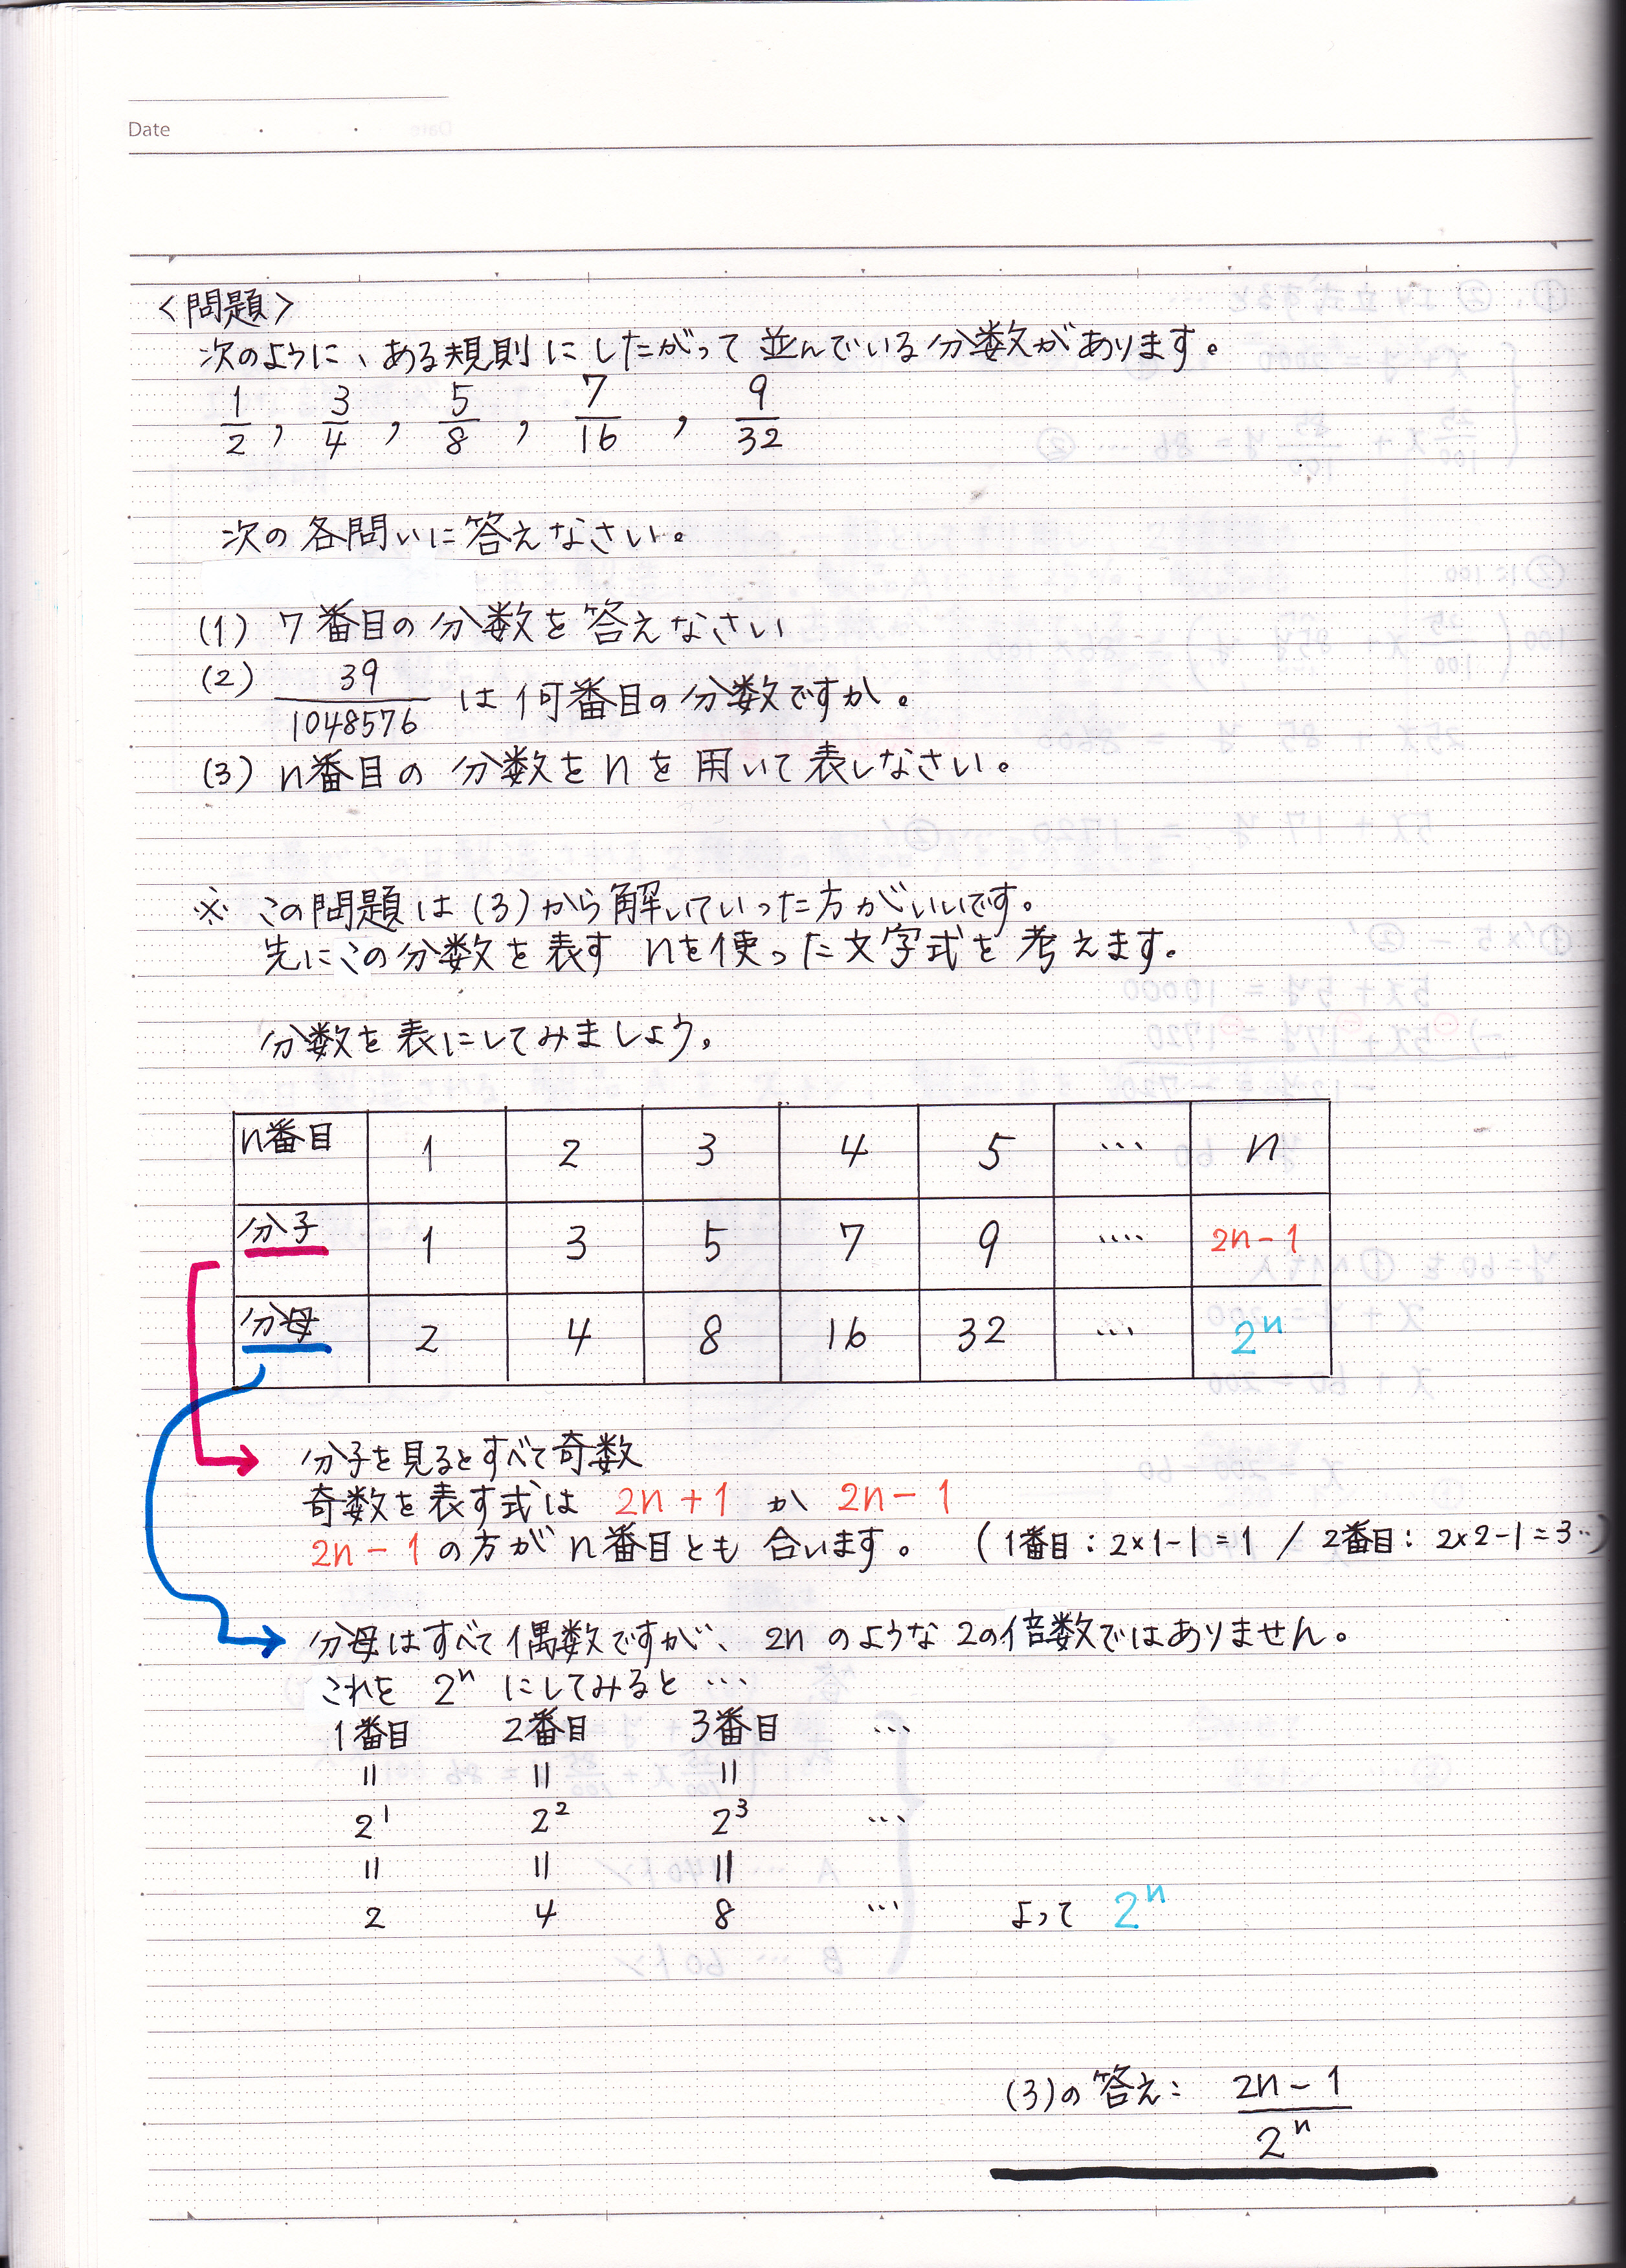 Category ノート 数学 Japaneseclass Jp